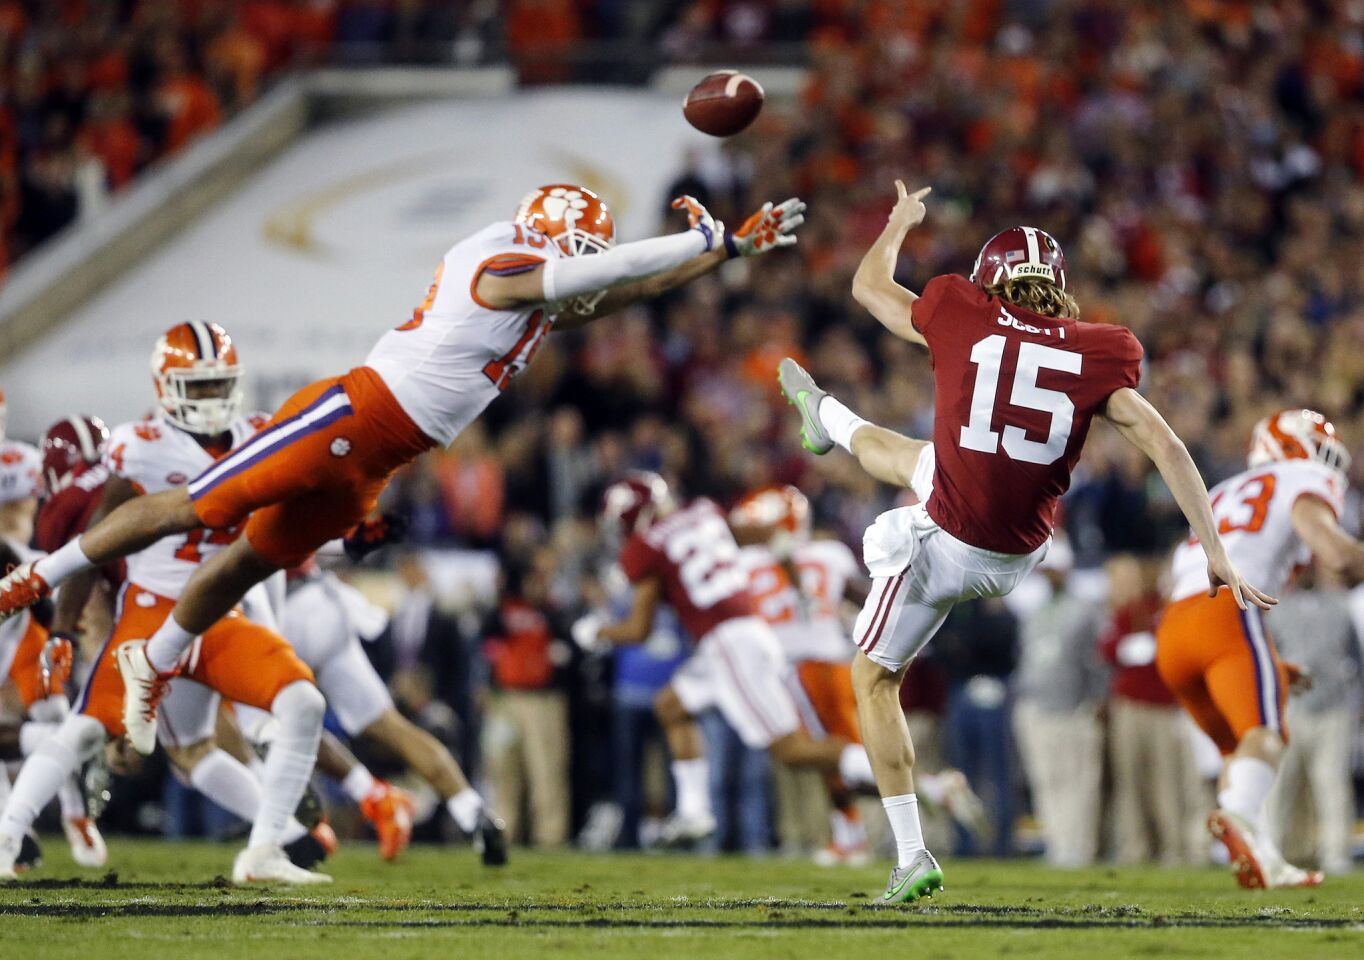 Clemson safety Tanner Muse partially blocks the punt of Alabama's JK Scott during the first quarter.